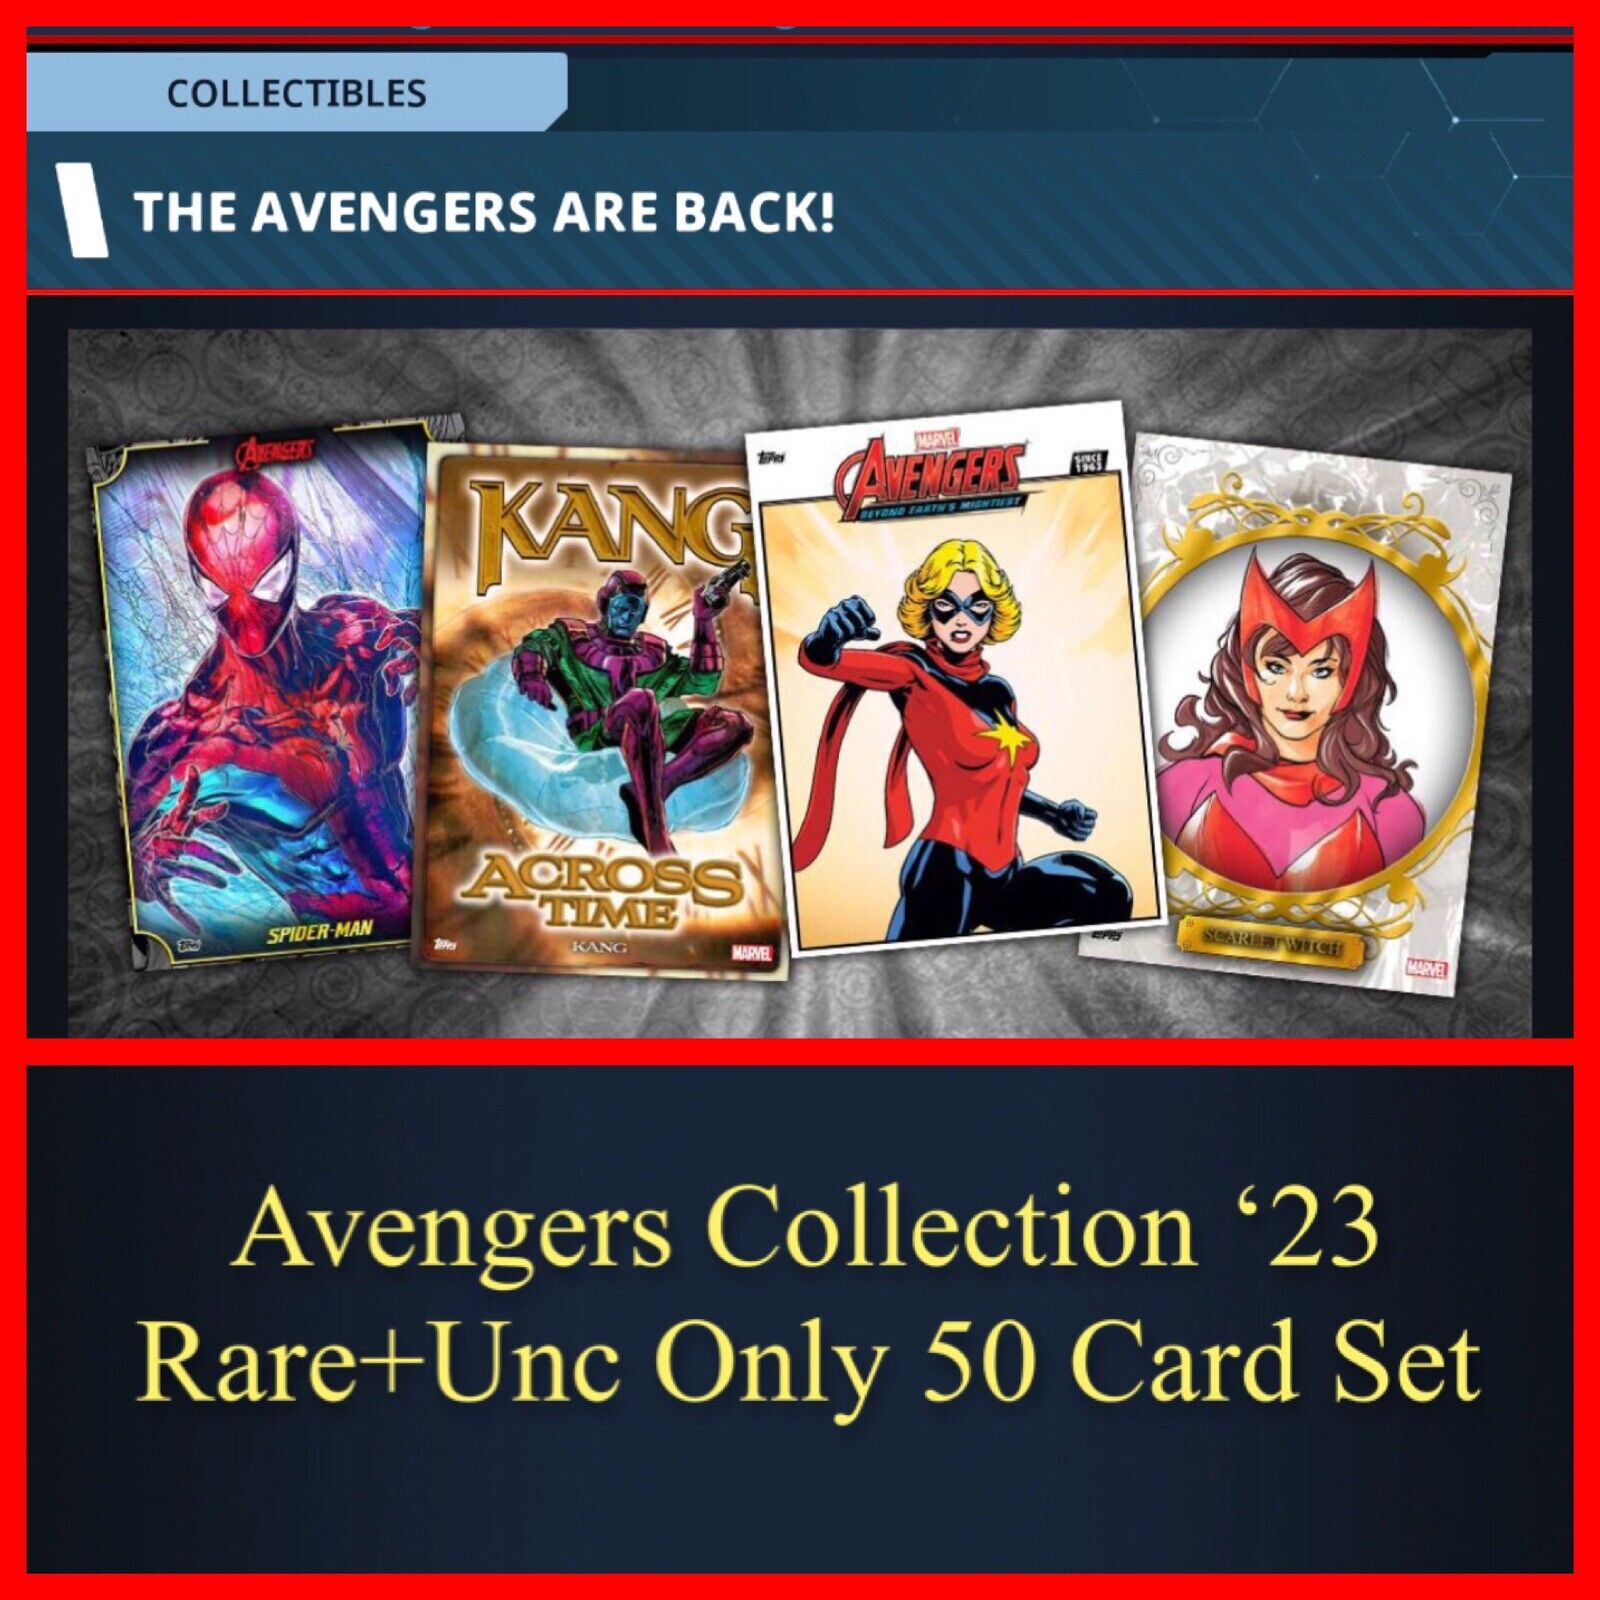 AVENGERS COLLECTION ‘23-RARE+UNC ONLY 50 CARD SET-TOPPS MARVEL COLLECT